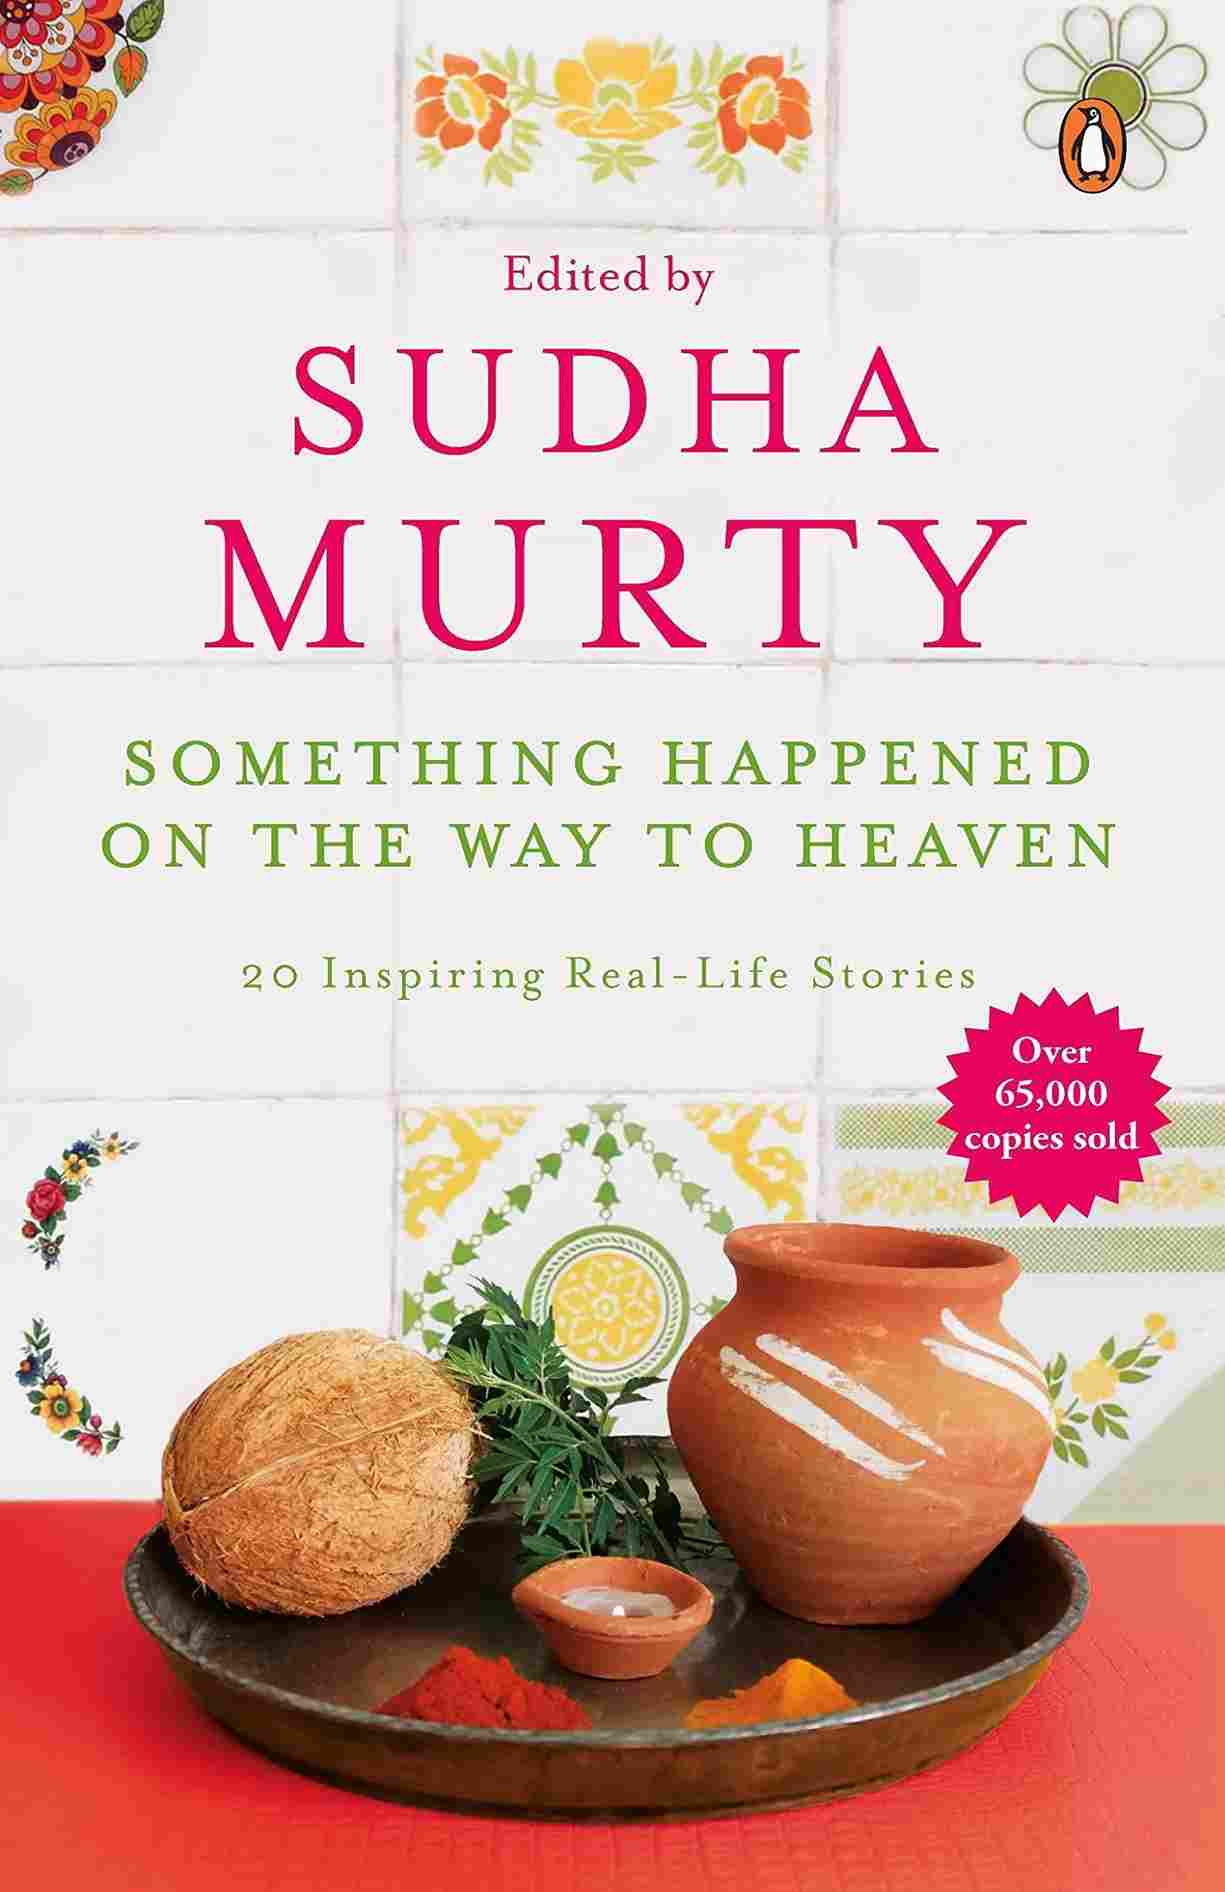 Something Happened on the Way to Heaven (Paperback) - Sudha Murthy - 99BooksStore